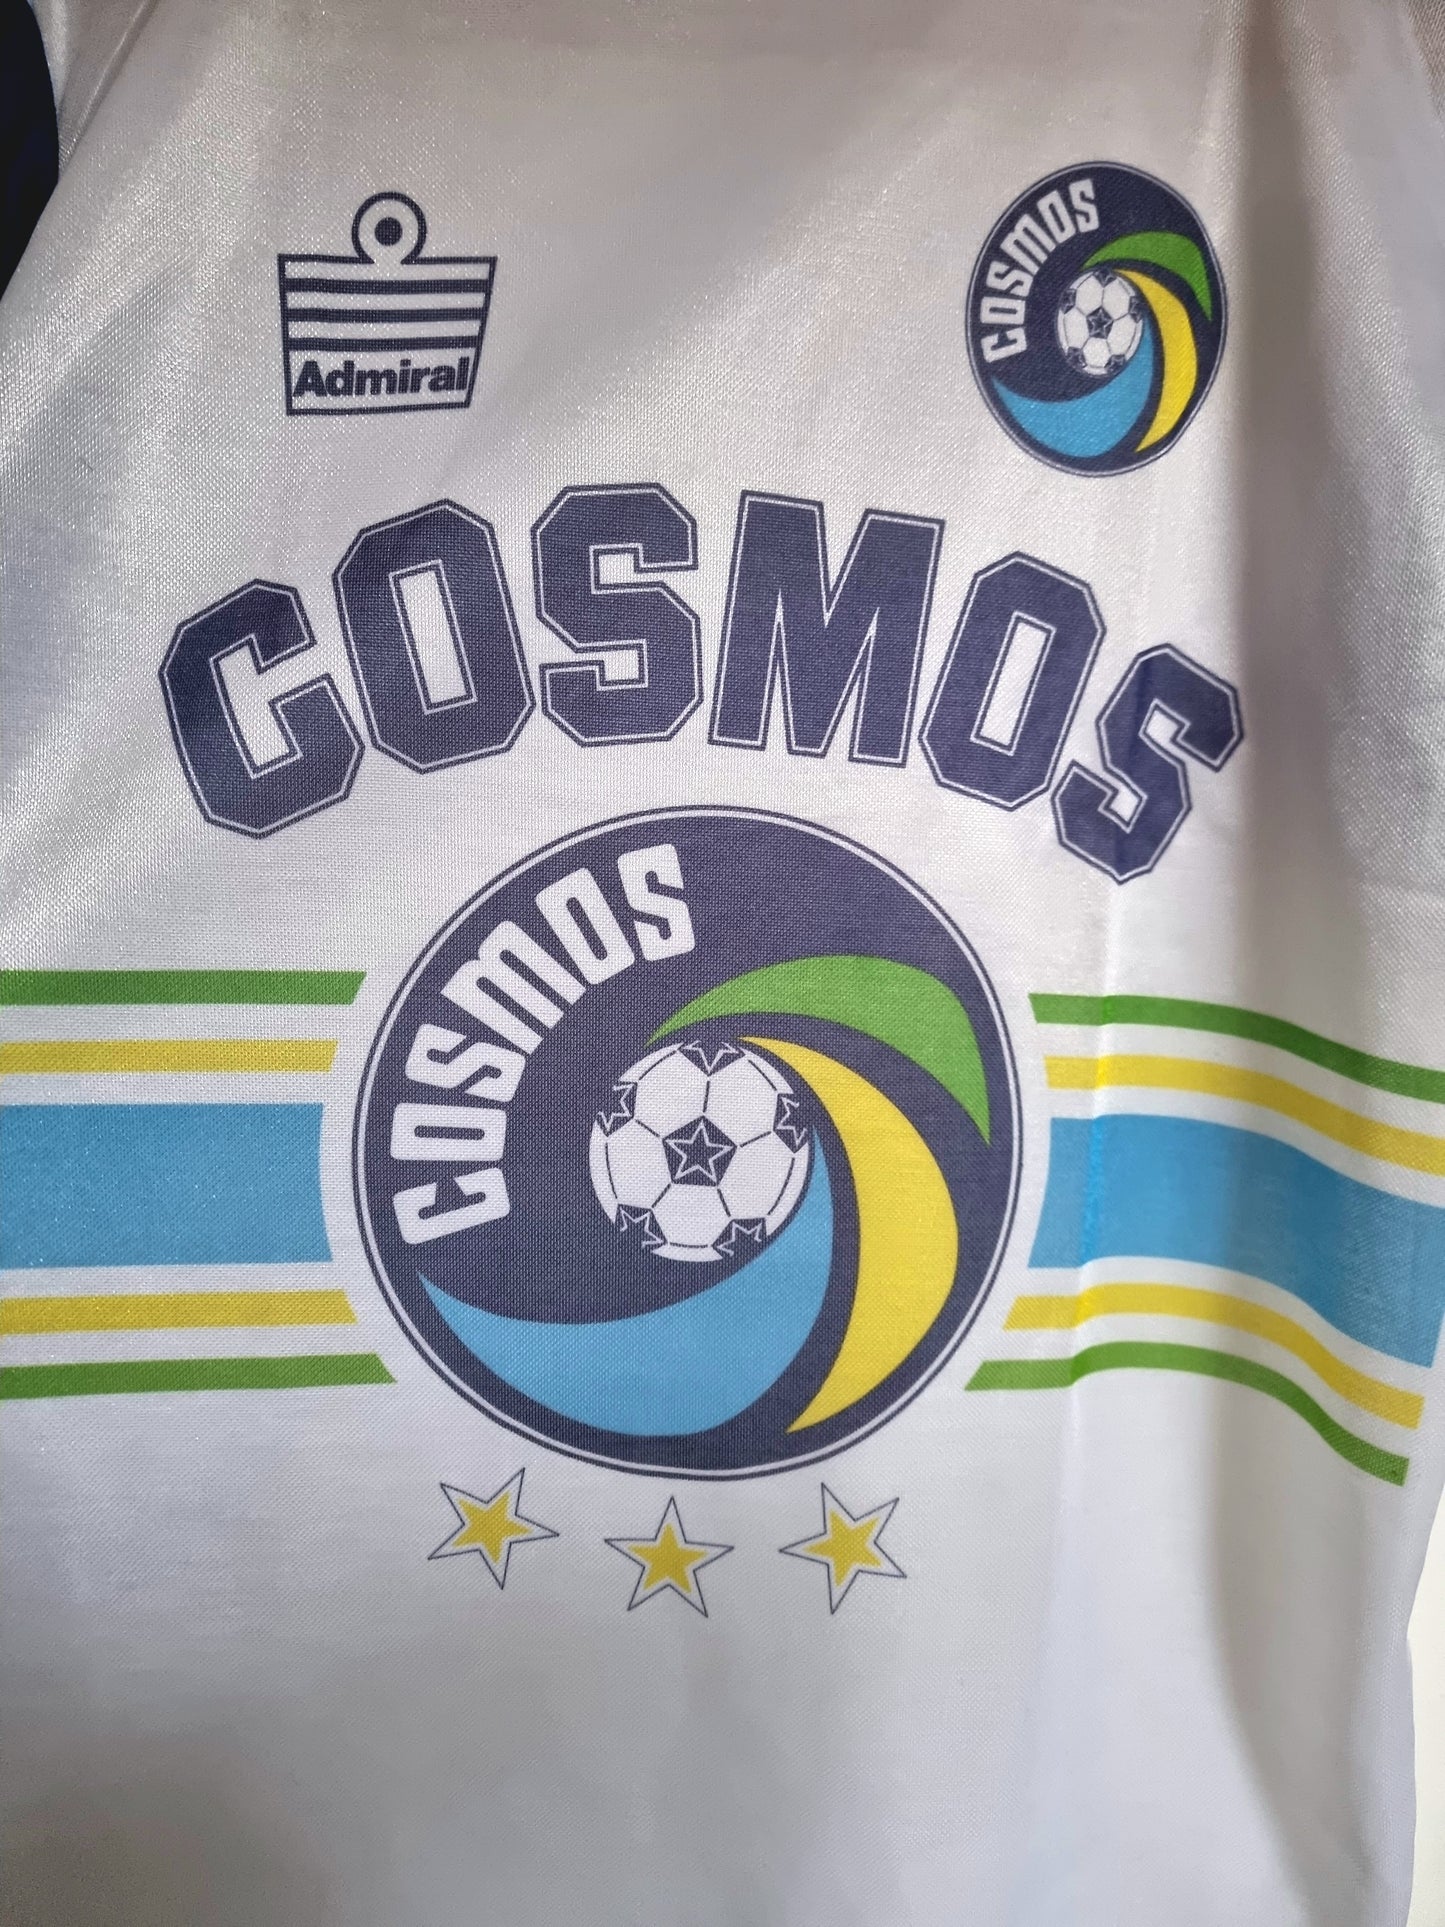 Admiral New York Cosmos 80s Leisure T- Shirt Large